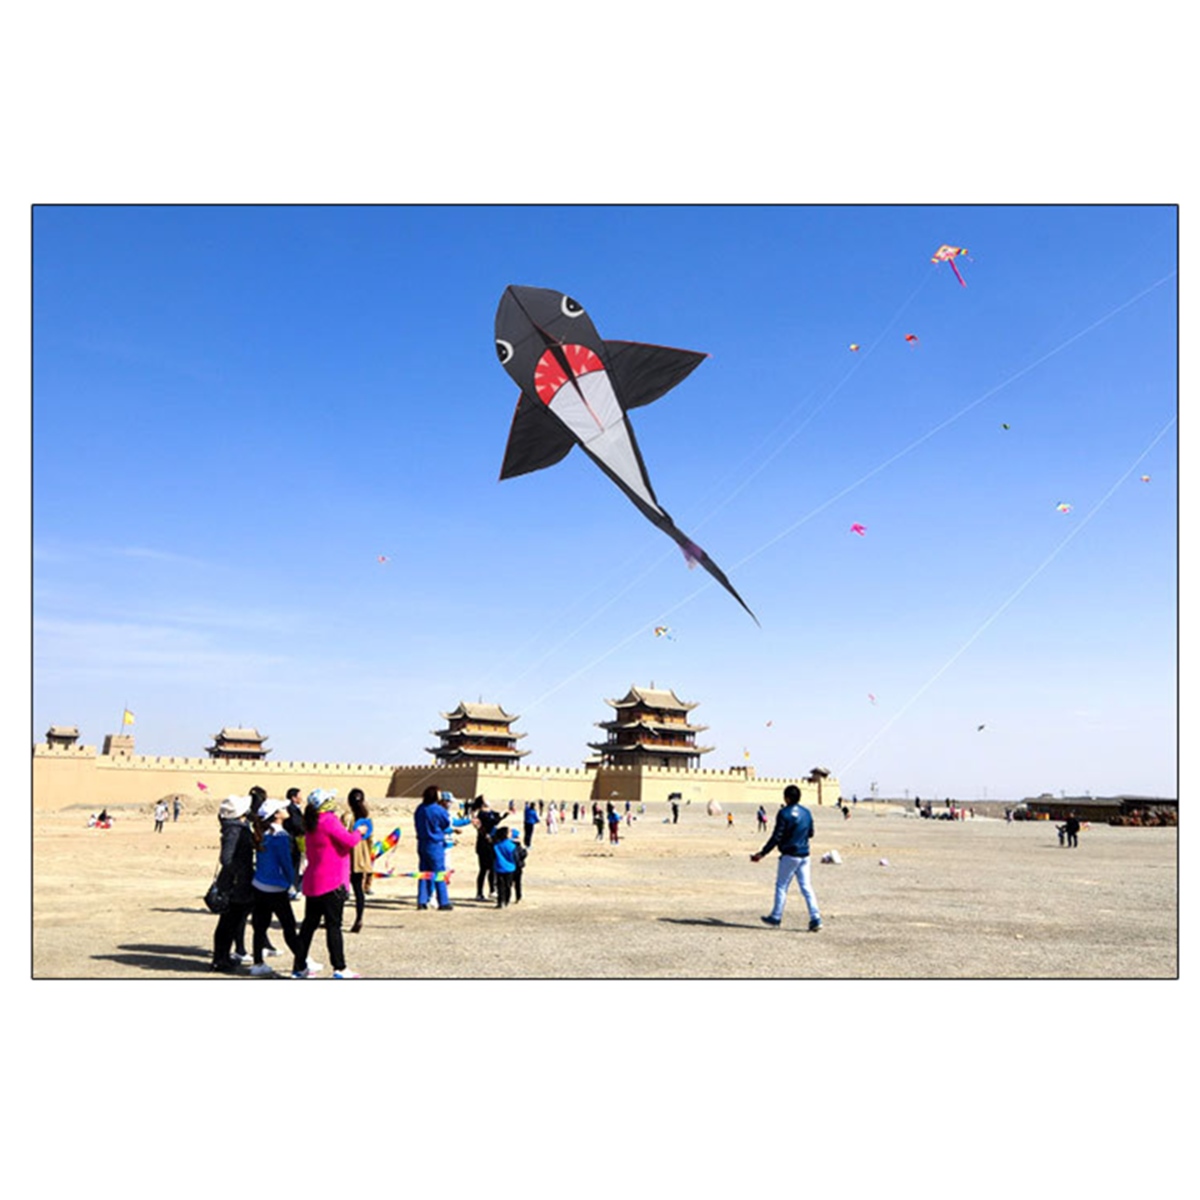 5577-Inches-Big-Size-Shark-Kite-Kid-Outdoor-Play-Toys-Without-Line-Winder-1436719-5